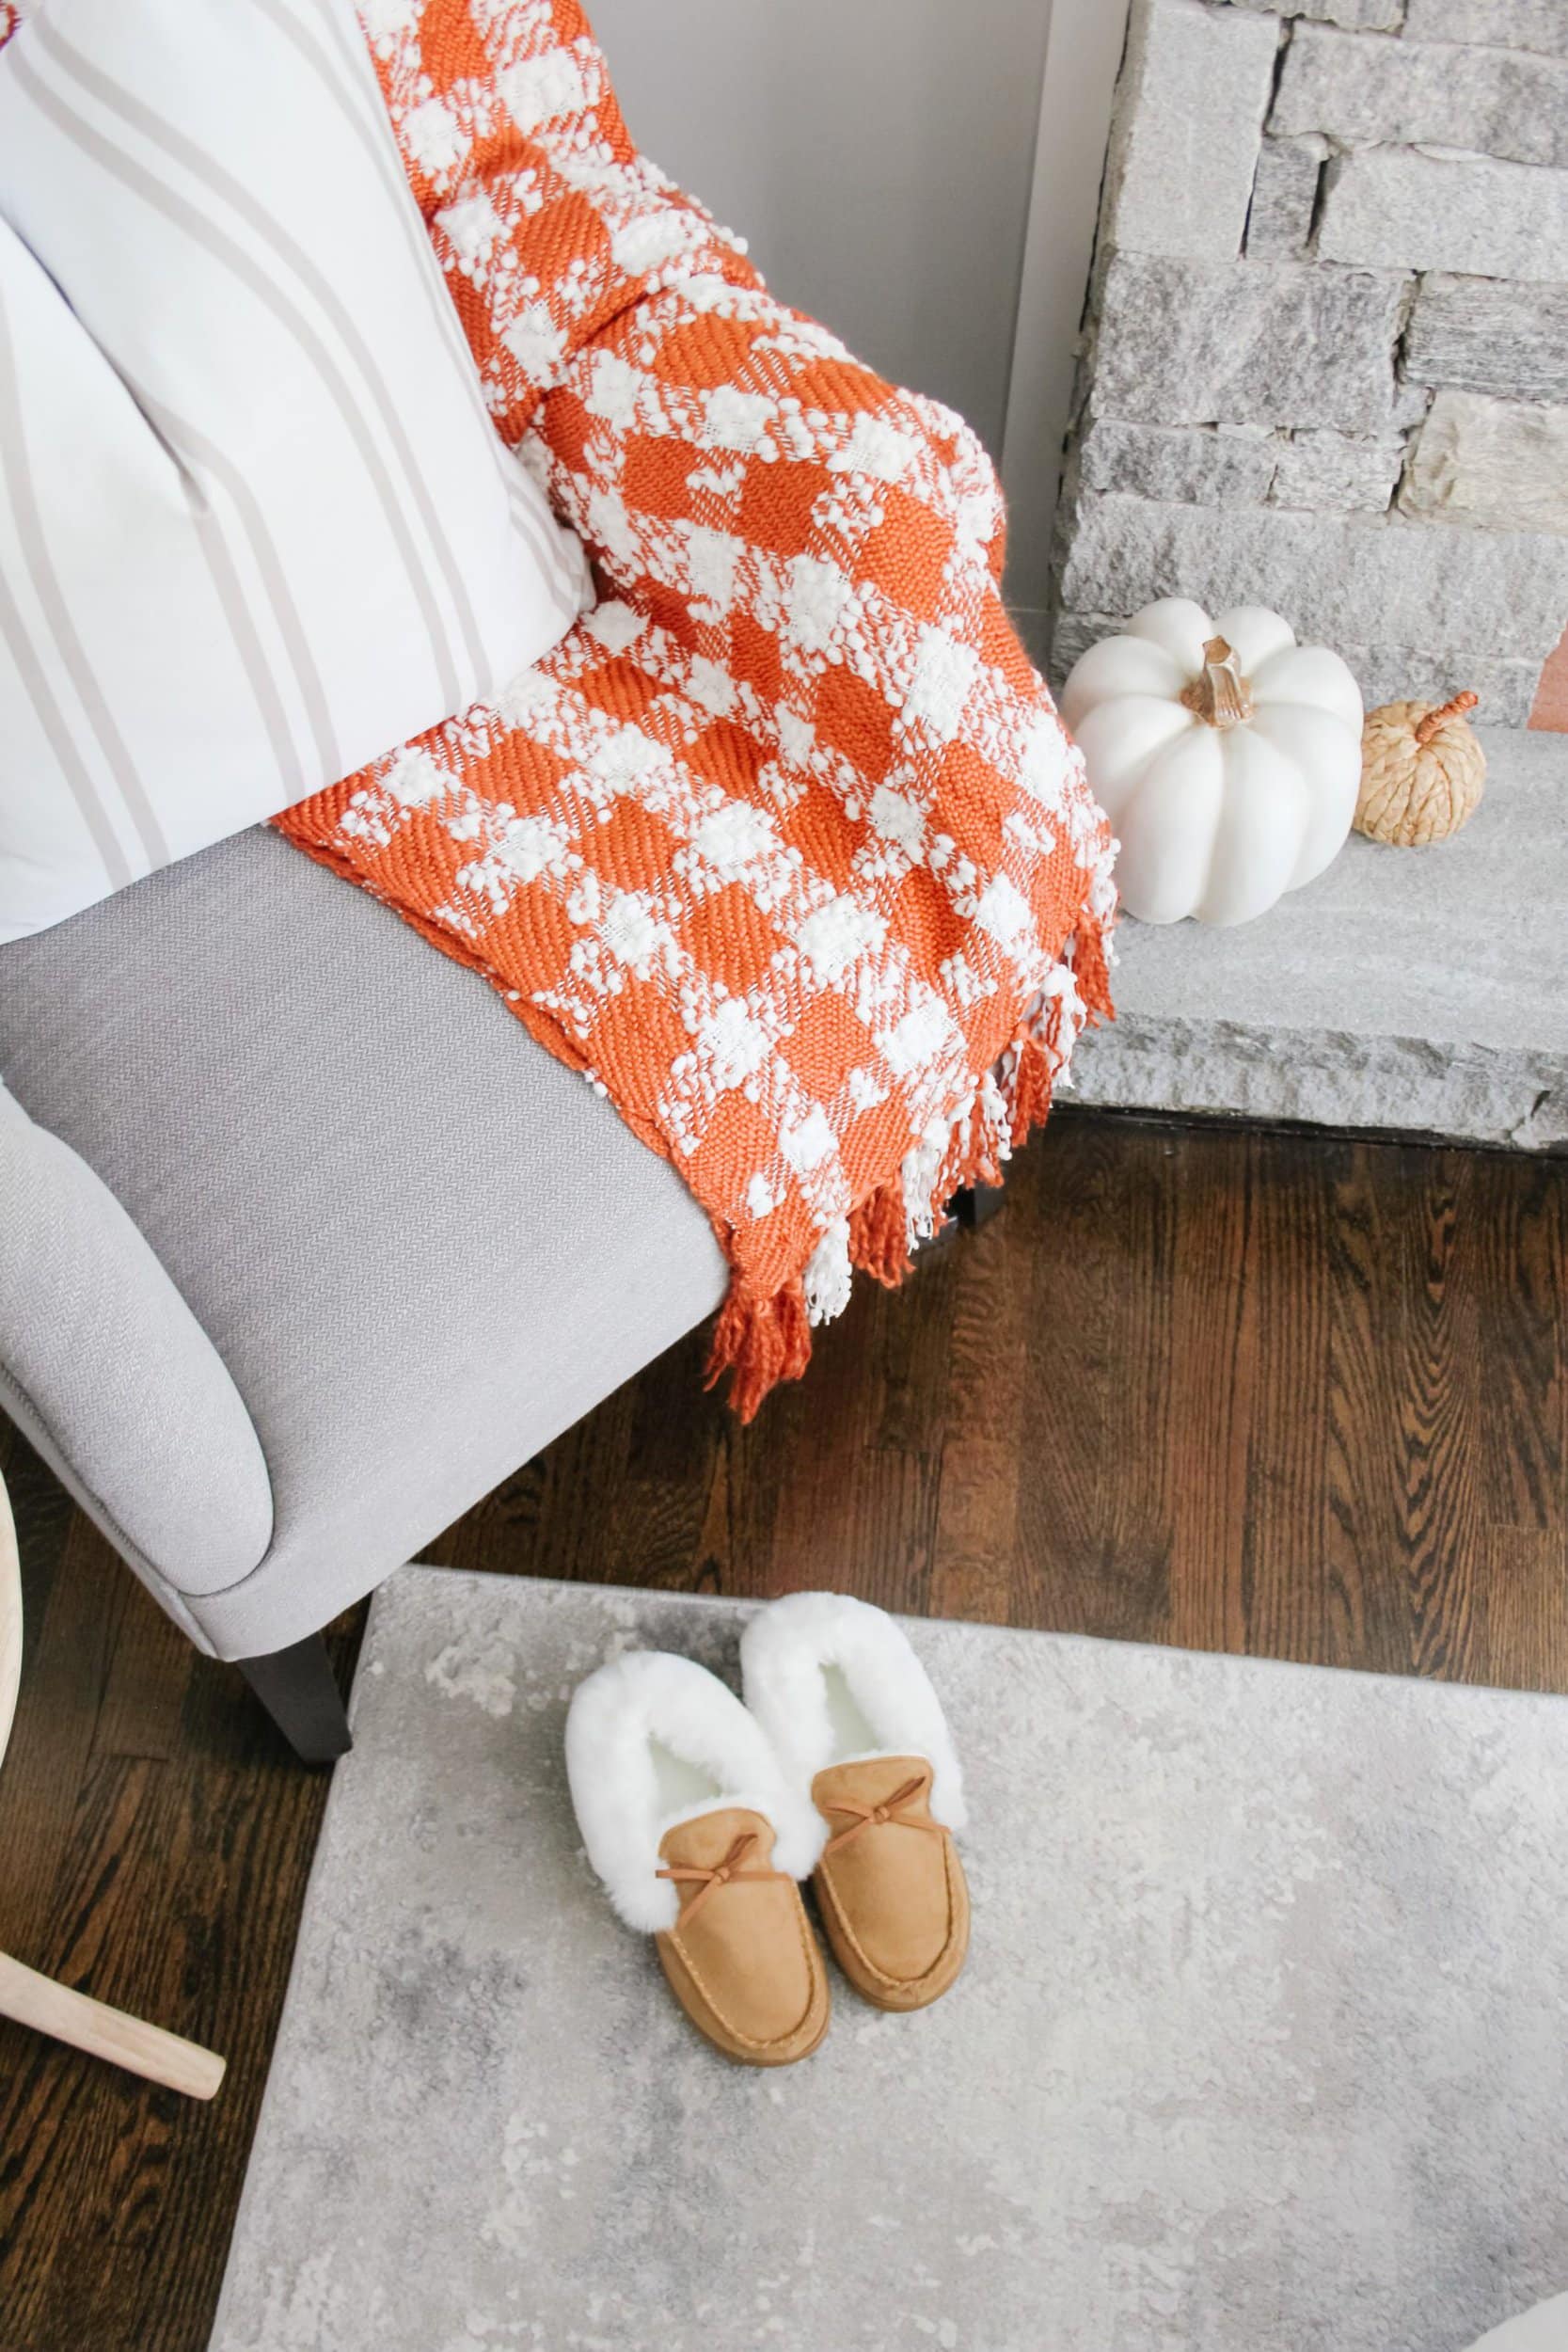 Tufted grey reading chair with orange and white buffalo check blanket, white pumpkins, and tan moccasins. Cozy fall blanket. 